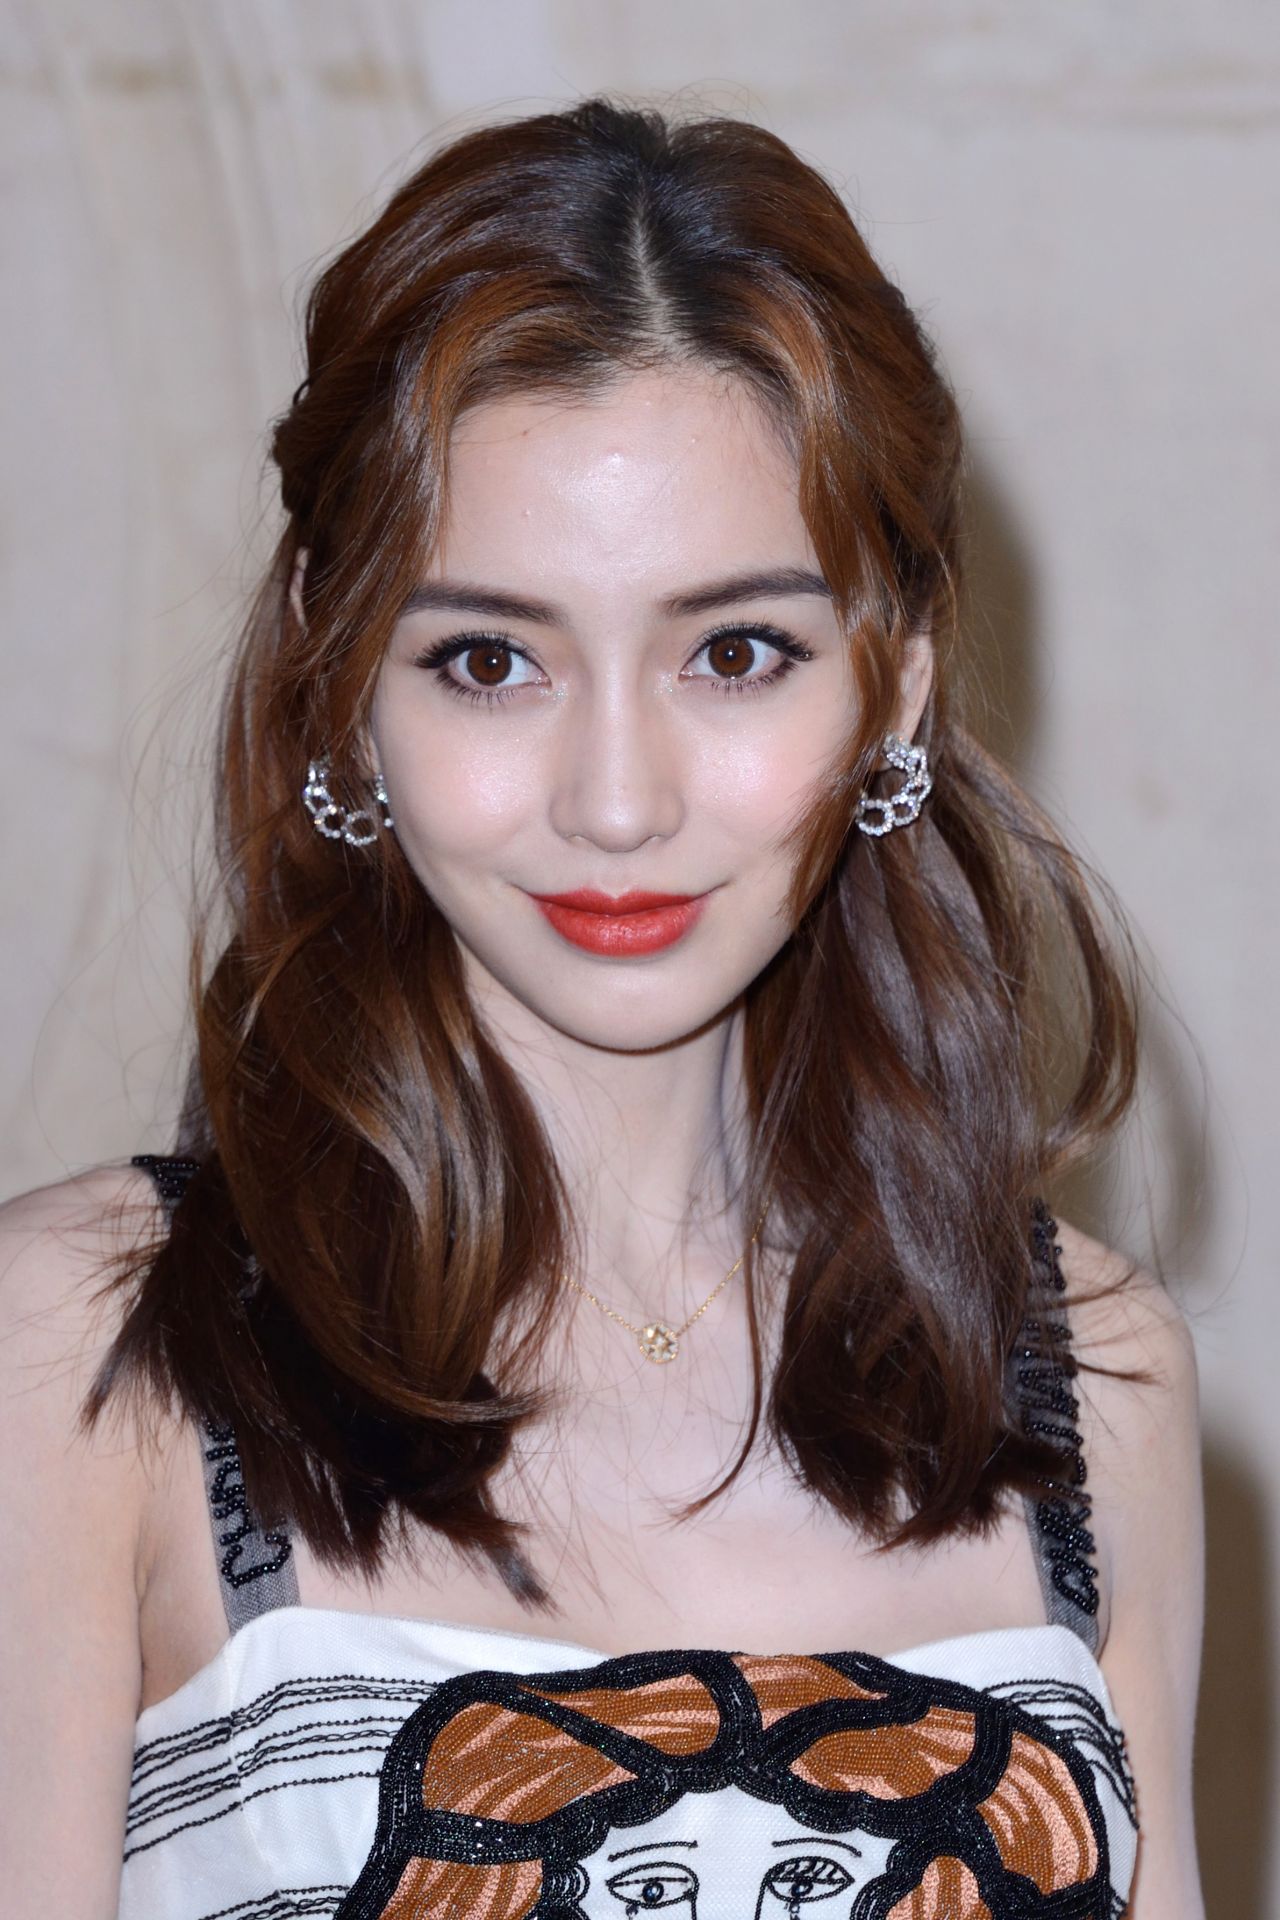 The Beauty Evolution Of Actress Angelababy | Metro.Style